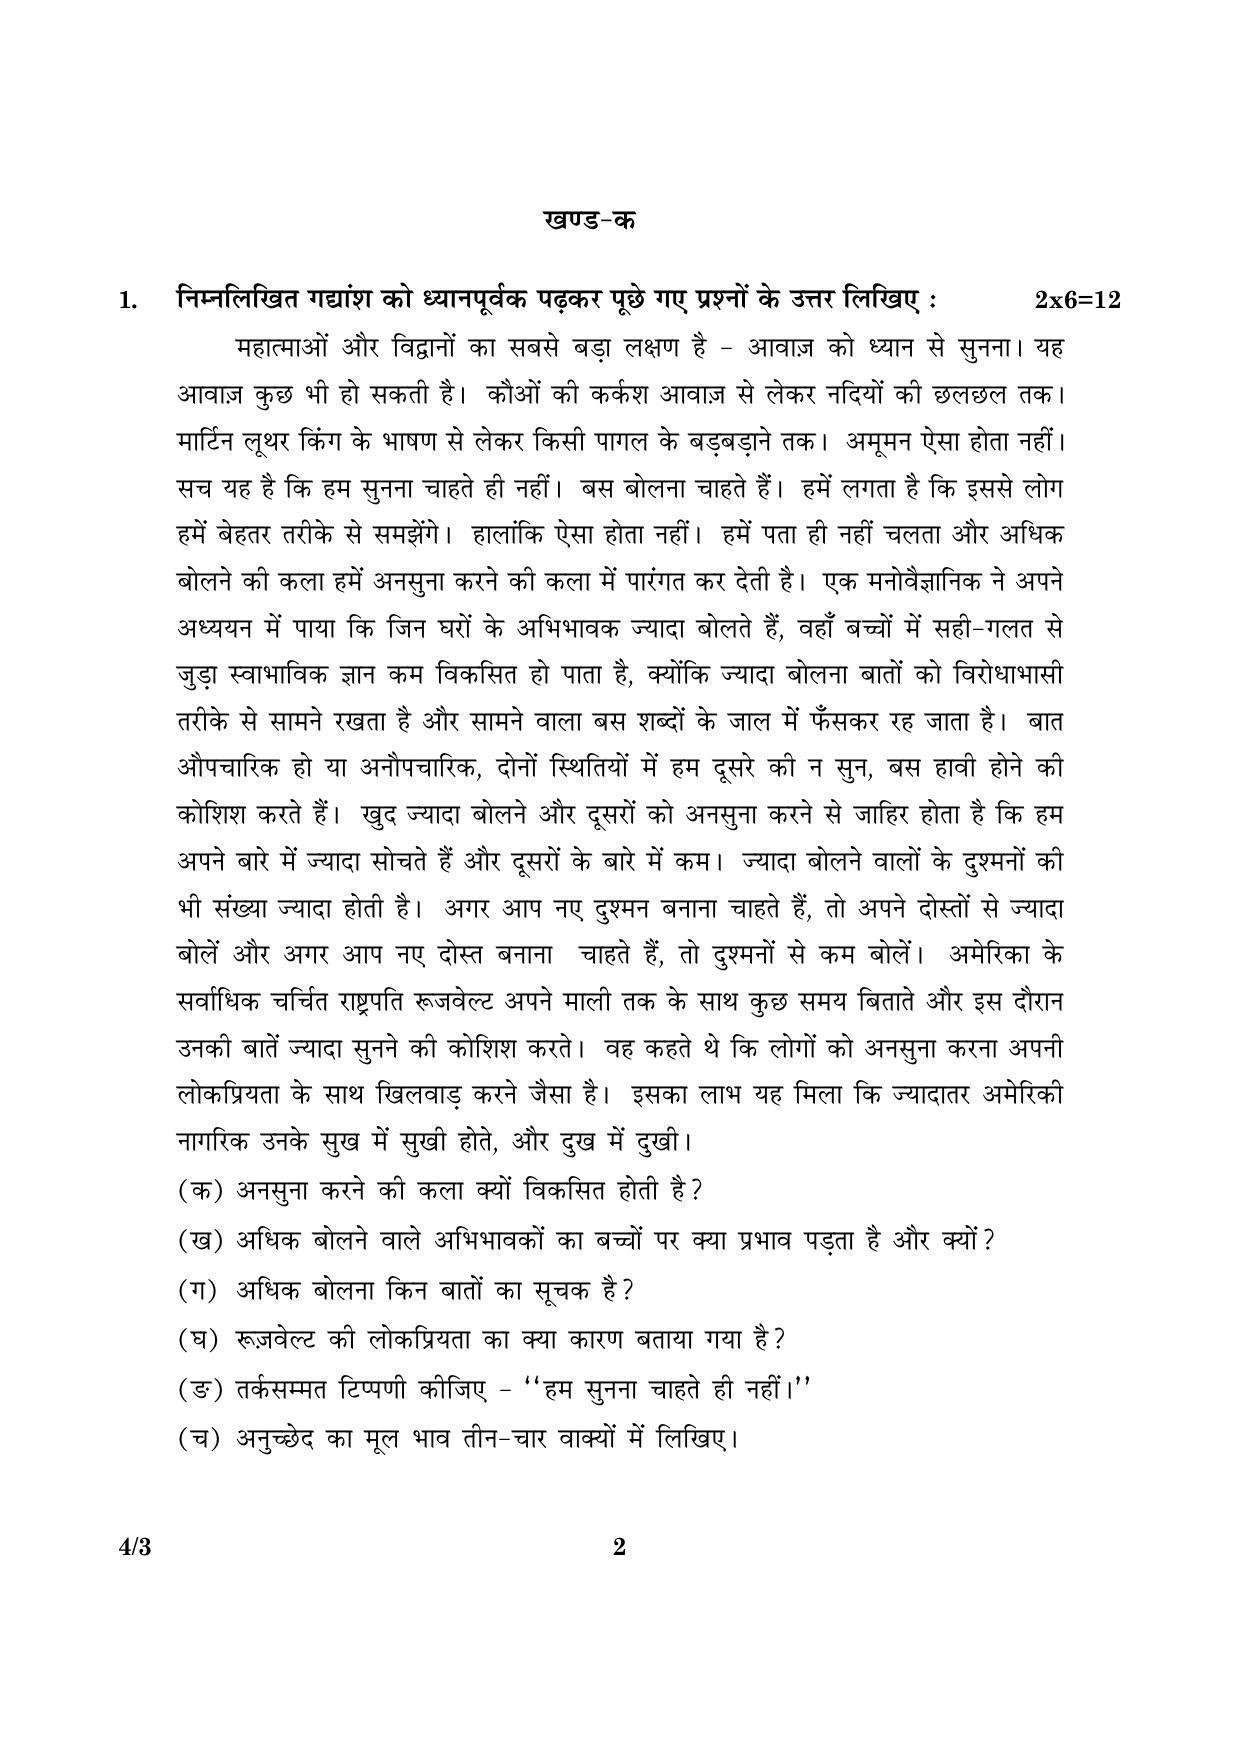 CBSE Class 10 004 Set 3 Hindi Course B 2016 Question Paper - Page 2